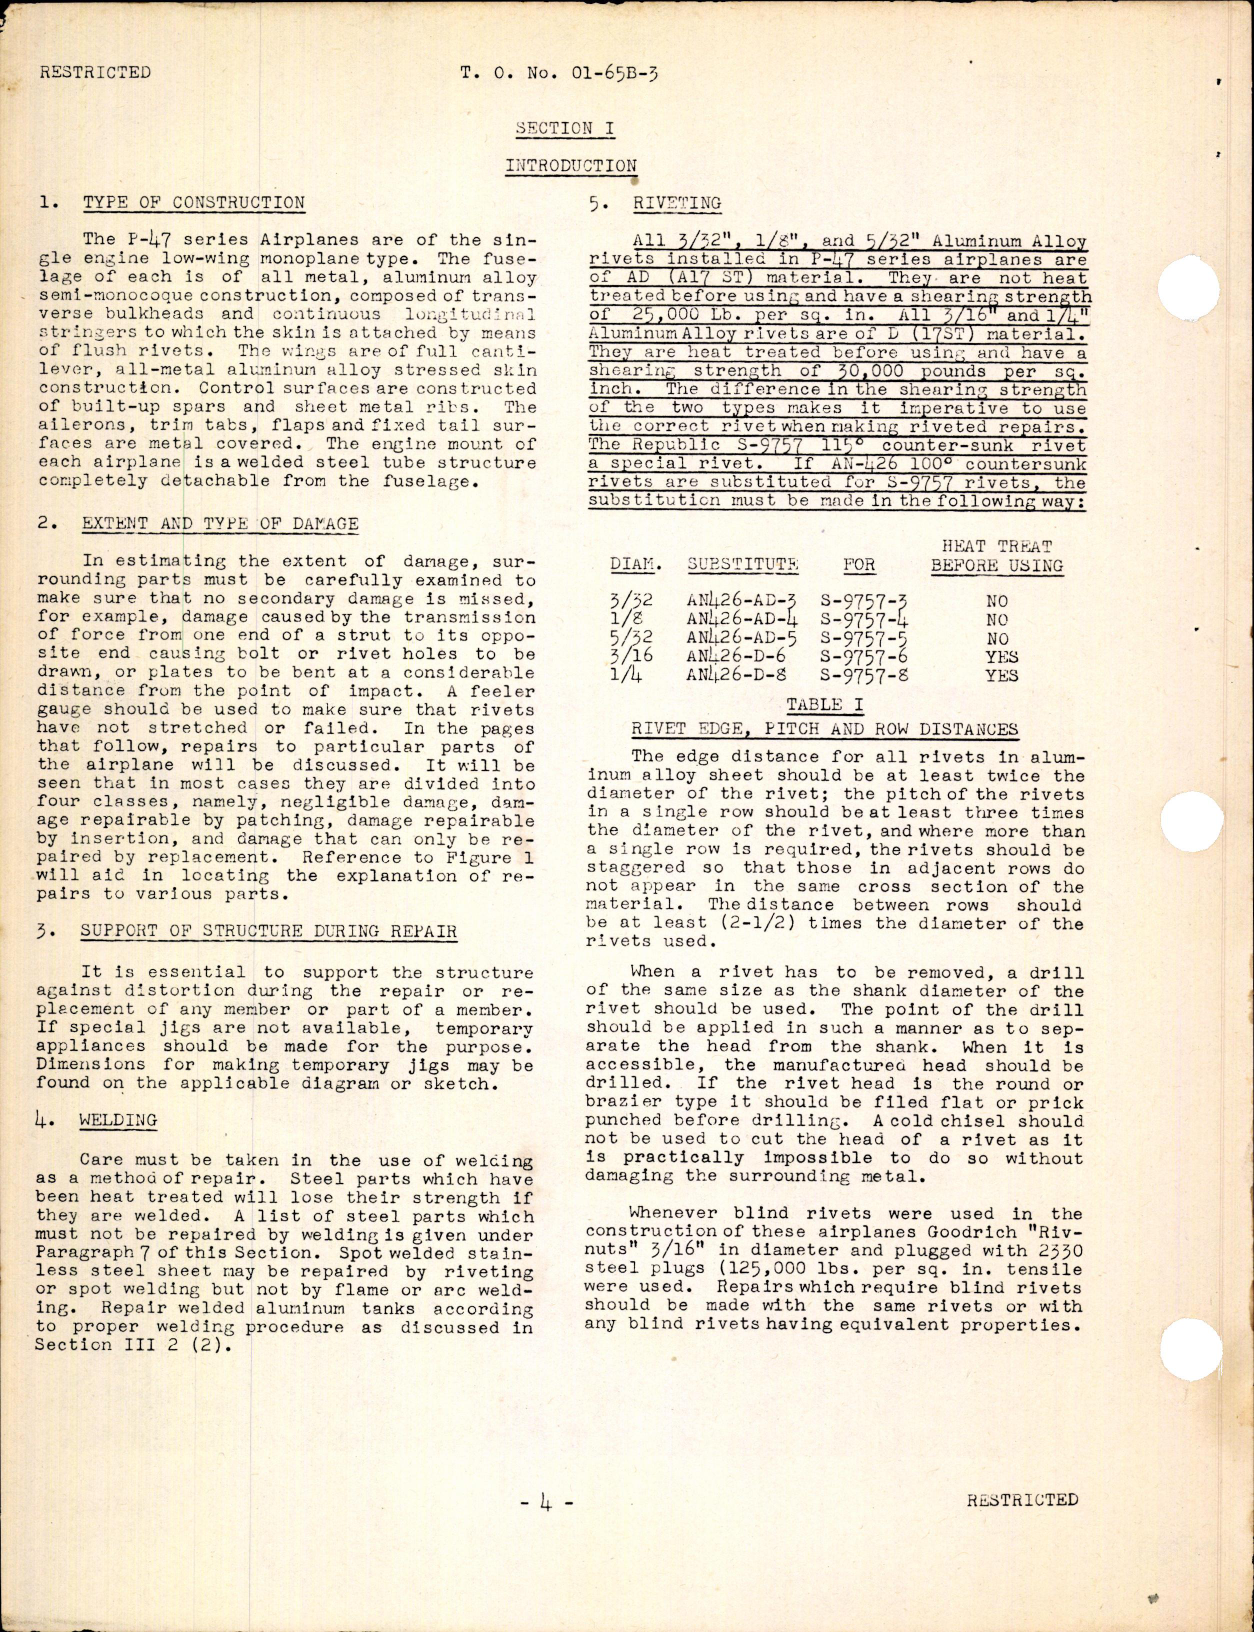 Sample page 6 from AirCorps Library document: Structural Repair Instructions for P-47 Series